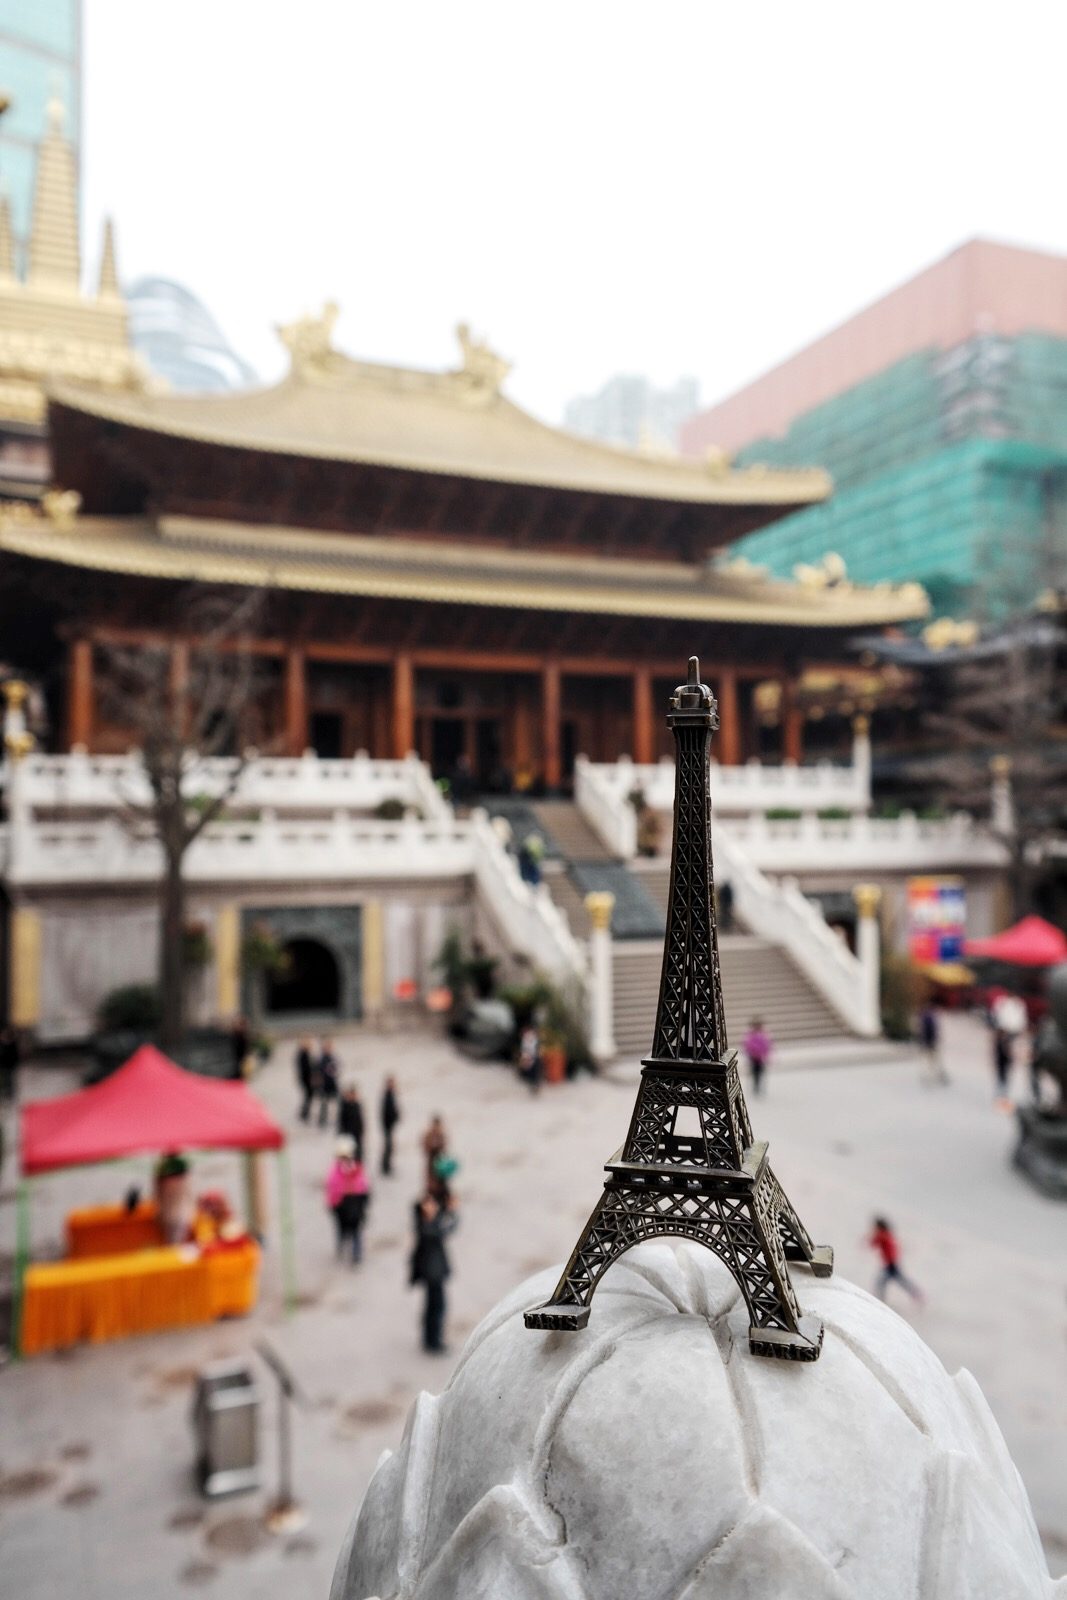 Eiffel Tower and Jing an Temple Shanghai west nanjing road buddhist Temple of peace and tranquility tourisme photo usofparis travel blog